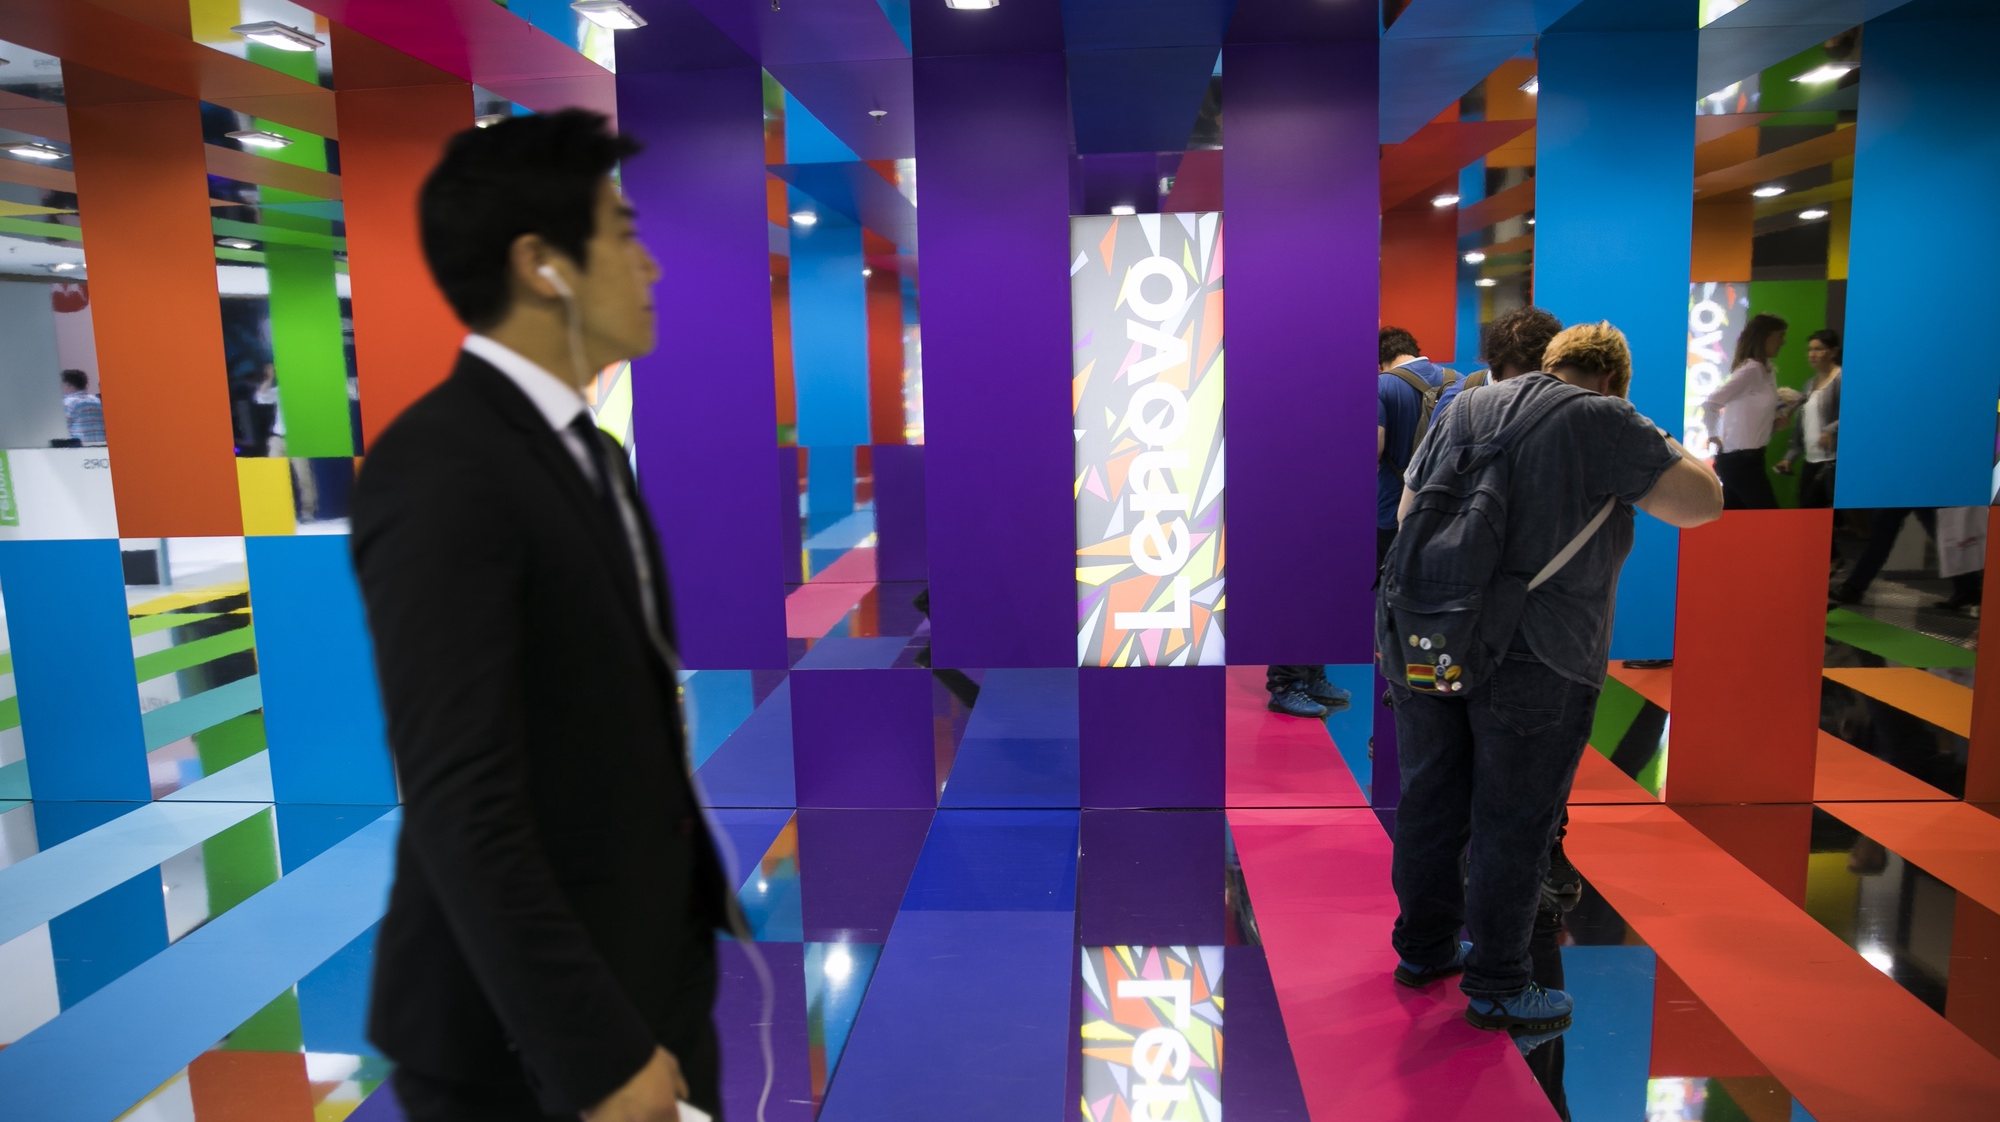 epa06177117 Visitors walks trough he passage of Lenovo company at the Internationale Funkaustellung Berlin (IFA), an international consumer electronics fair, in Berlin, Germany, 01 September 2017. The IFA is the world&#039;s leading trade show for consumer electronics and home appliances and is open for the general public from 01 to 06 September. The fair presents over 1800 exhibitors from more than 50 countries and is expected to be visited by more than 200.000 visitors this year.  EPA/CARSTEN KOALL